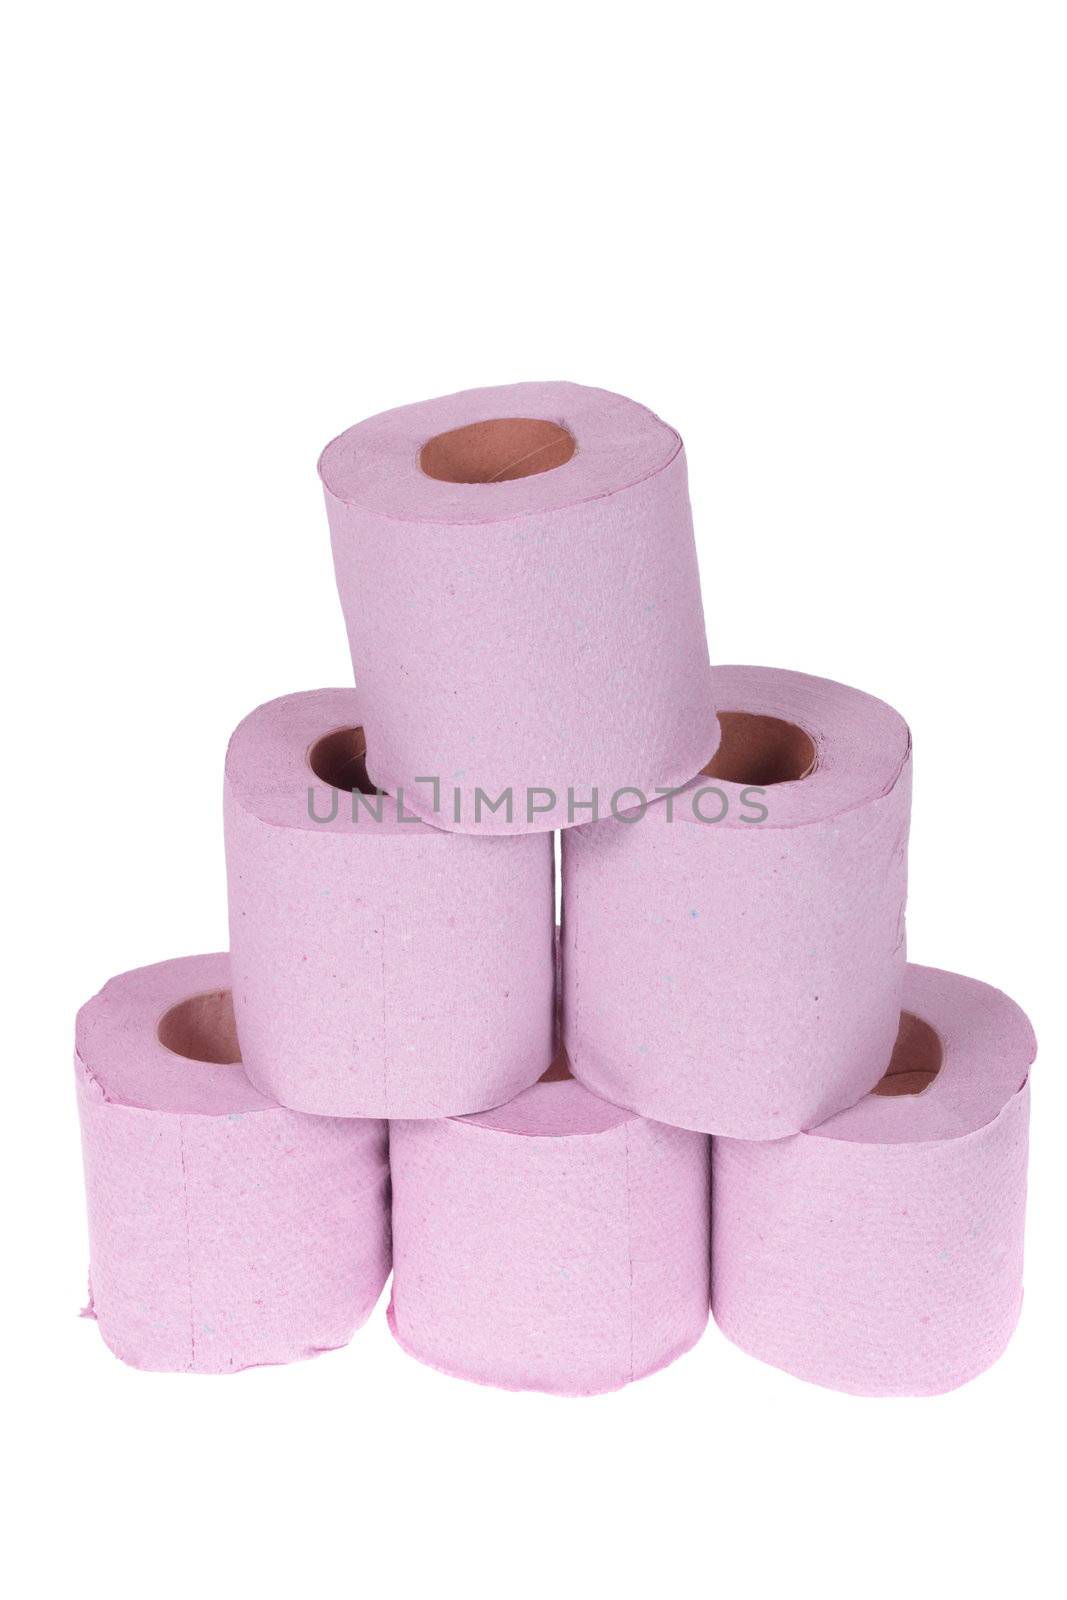 Roll of the pink toilet paper, isolated on white